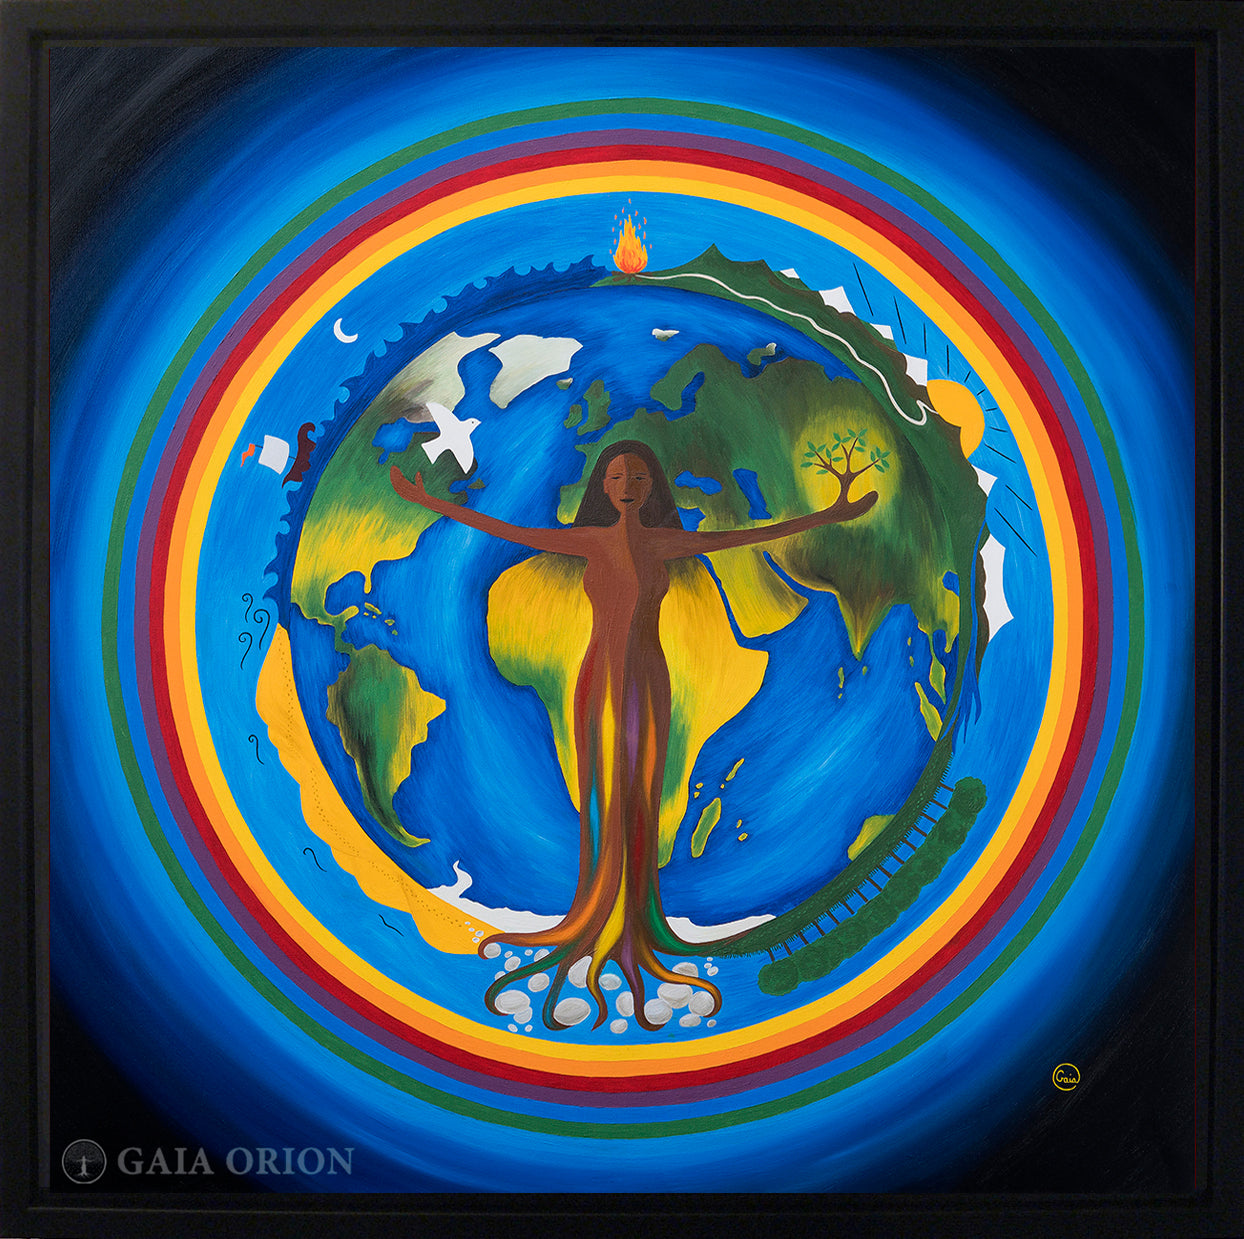 Mother nature holding a sprouting tree with sun moon the four elements fire water air earth and a rainbow circle